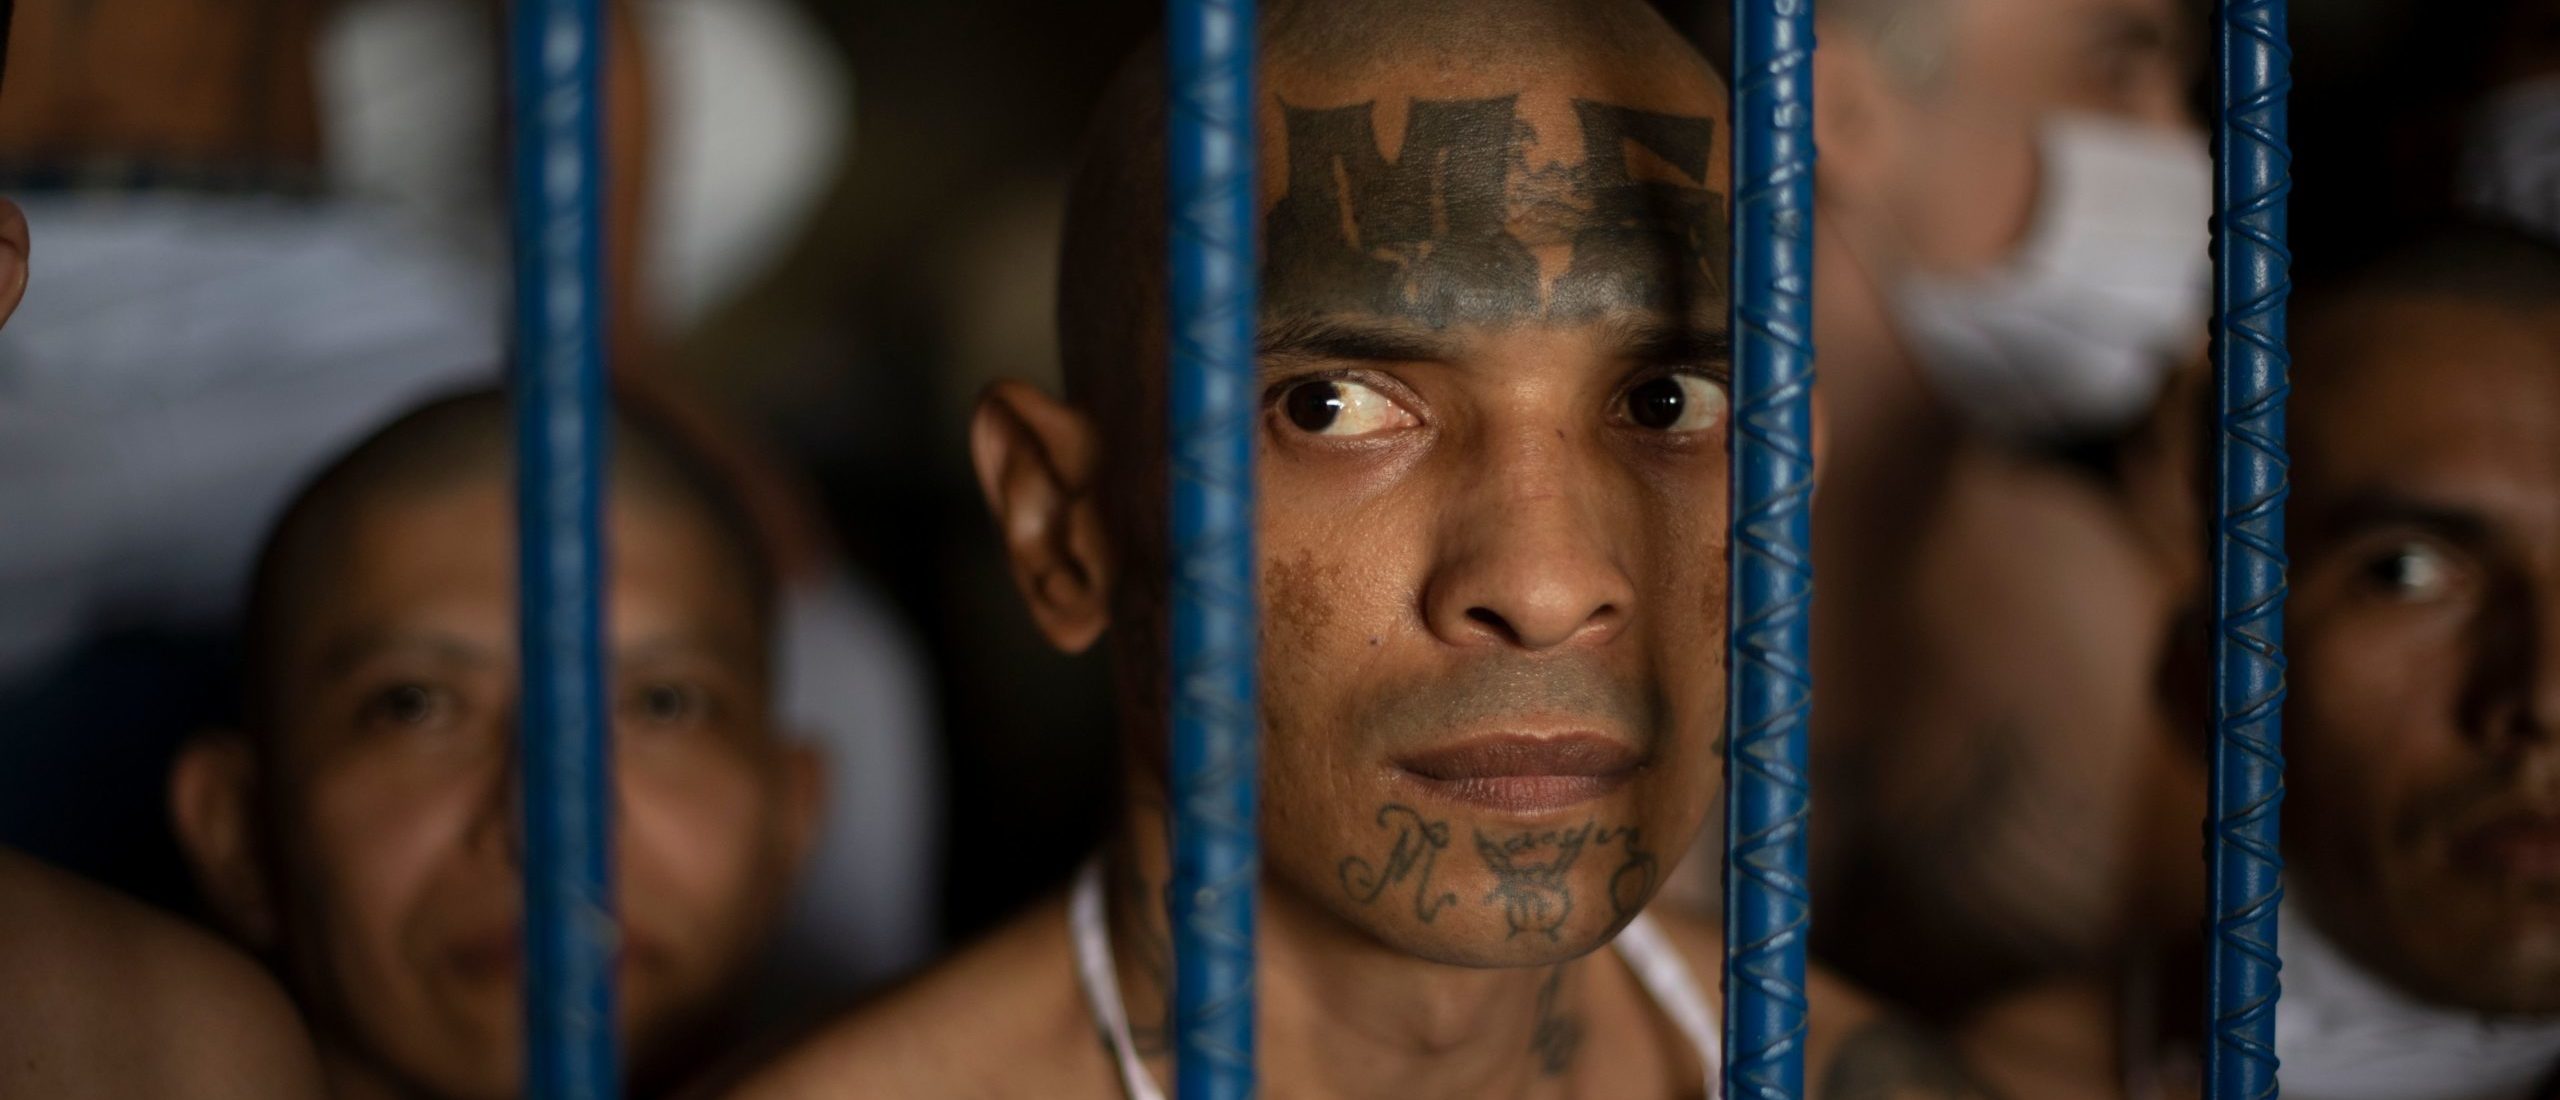 3 Virginia Men Charged With Murder Linked With MS-13 Gang Violence.